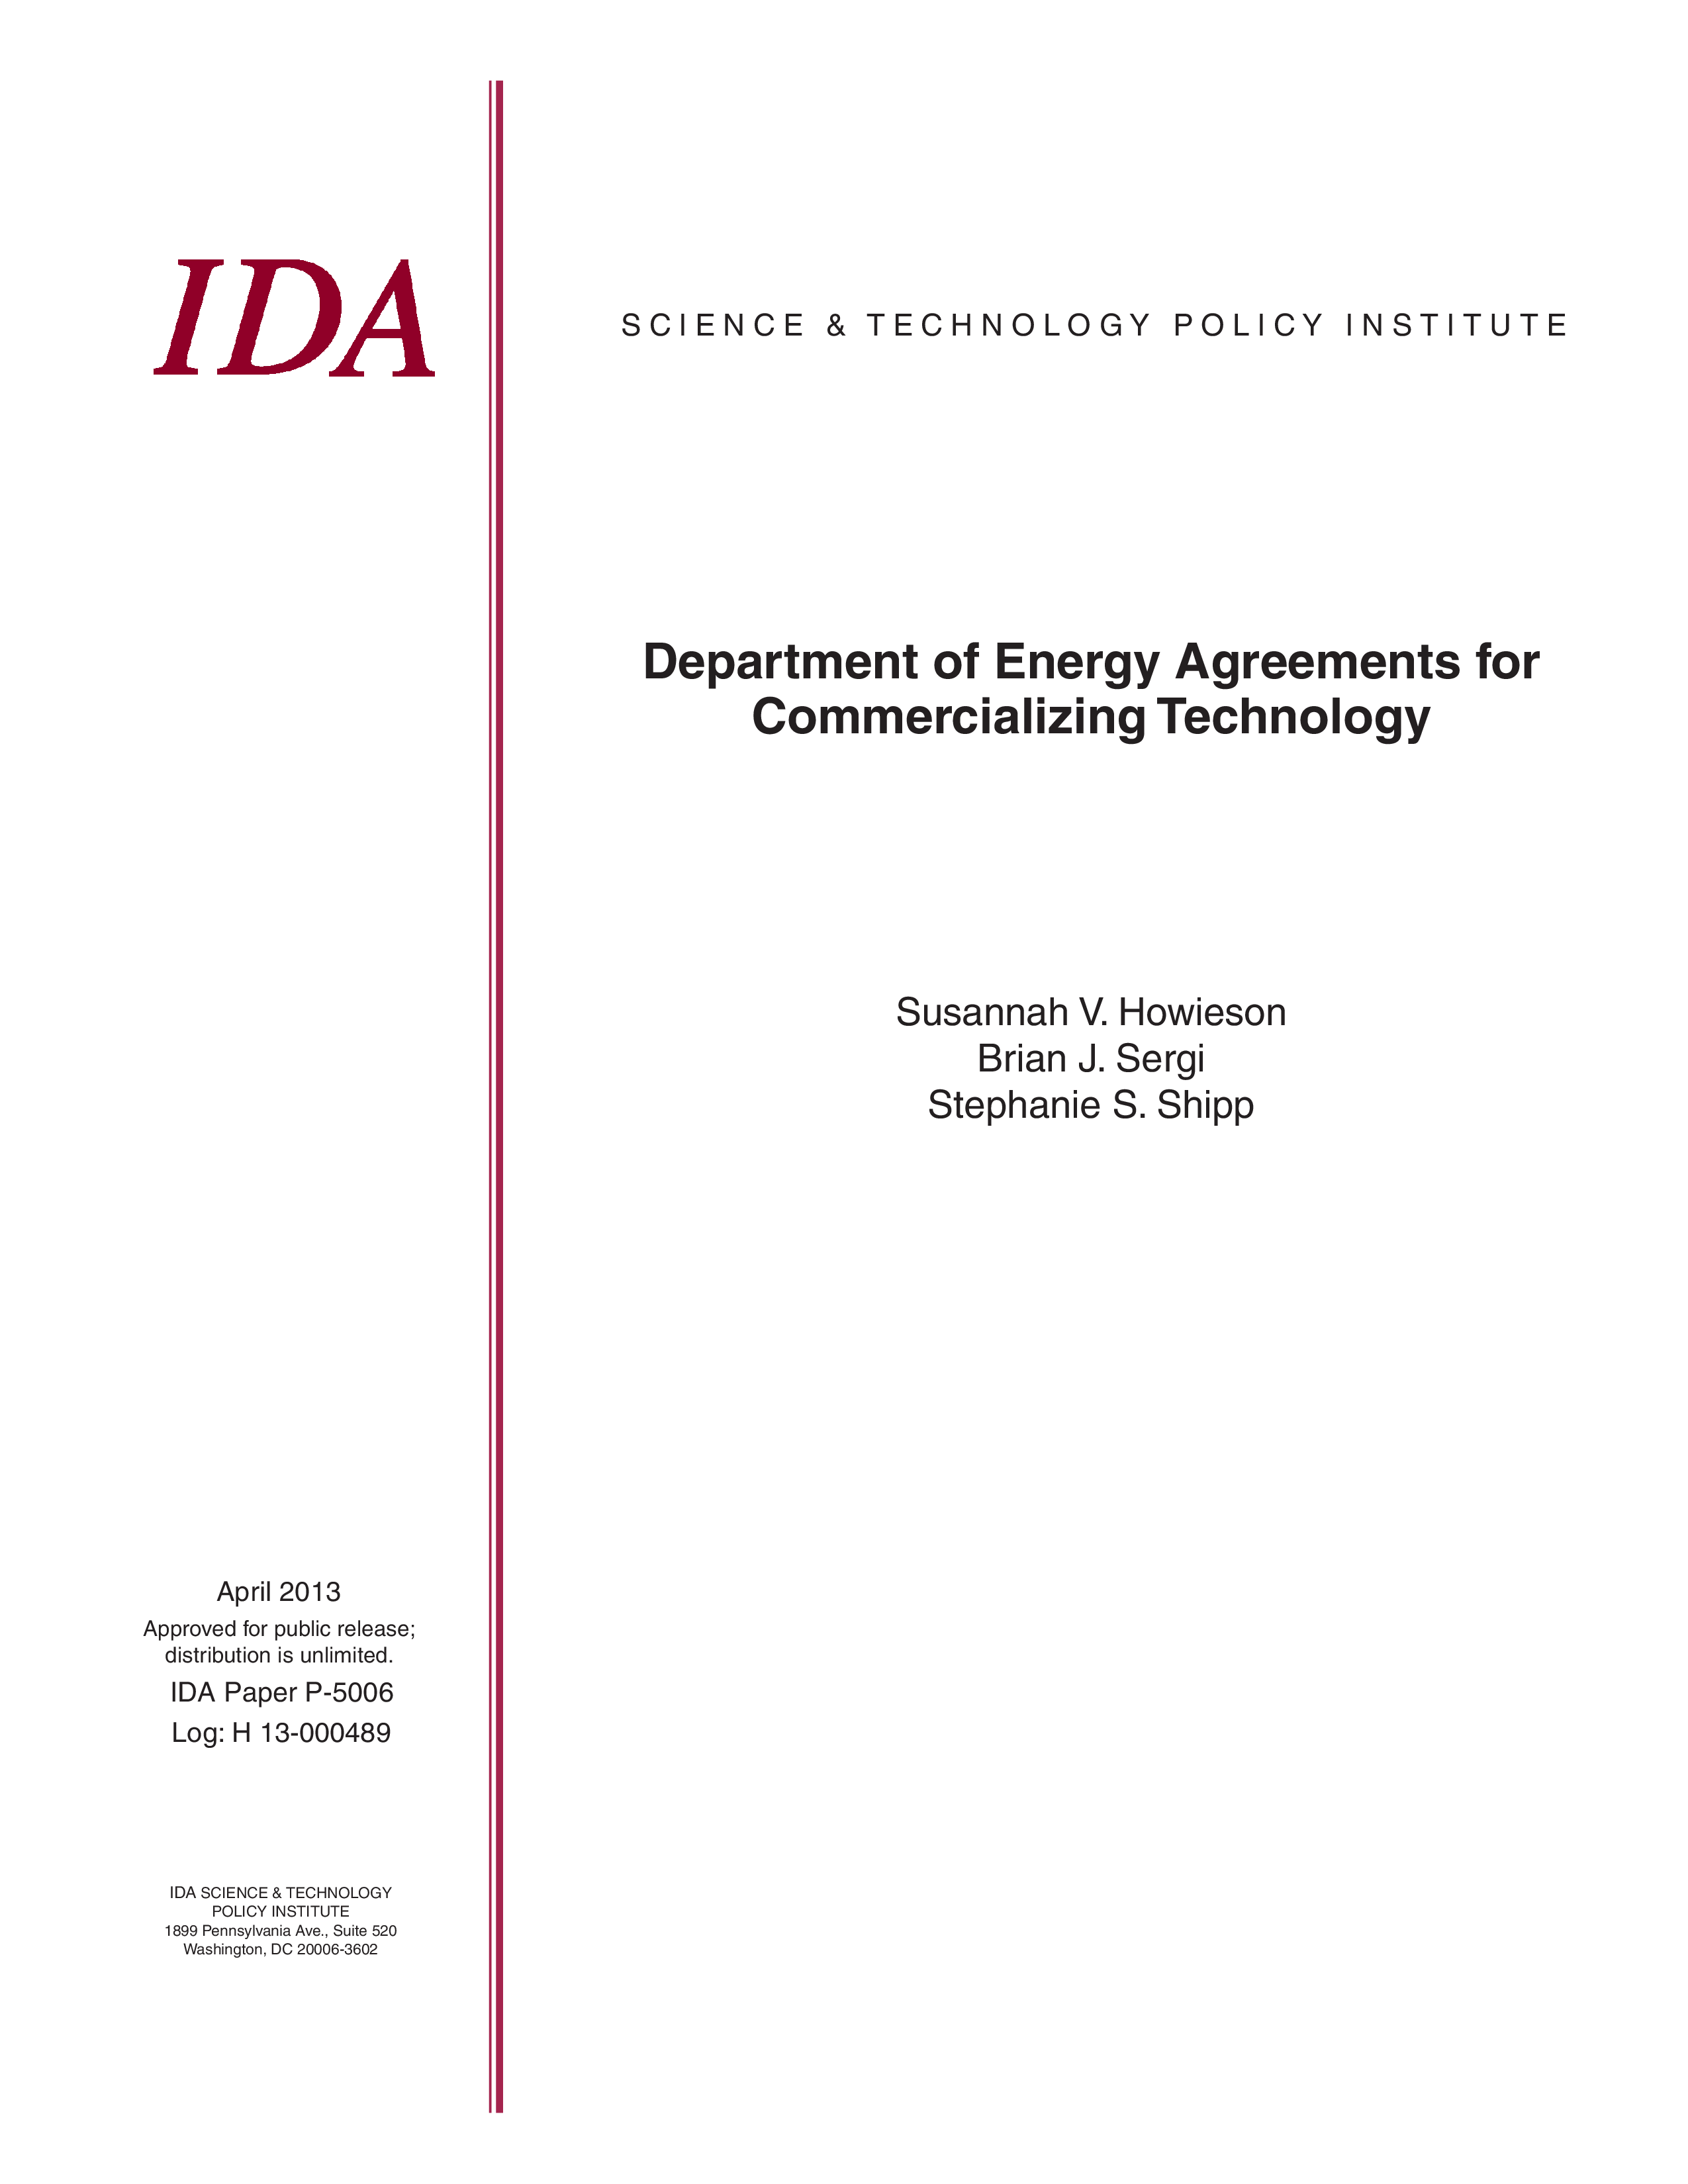 Department of Energy Agreements for Commercializing Technology